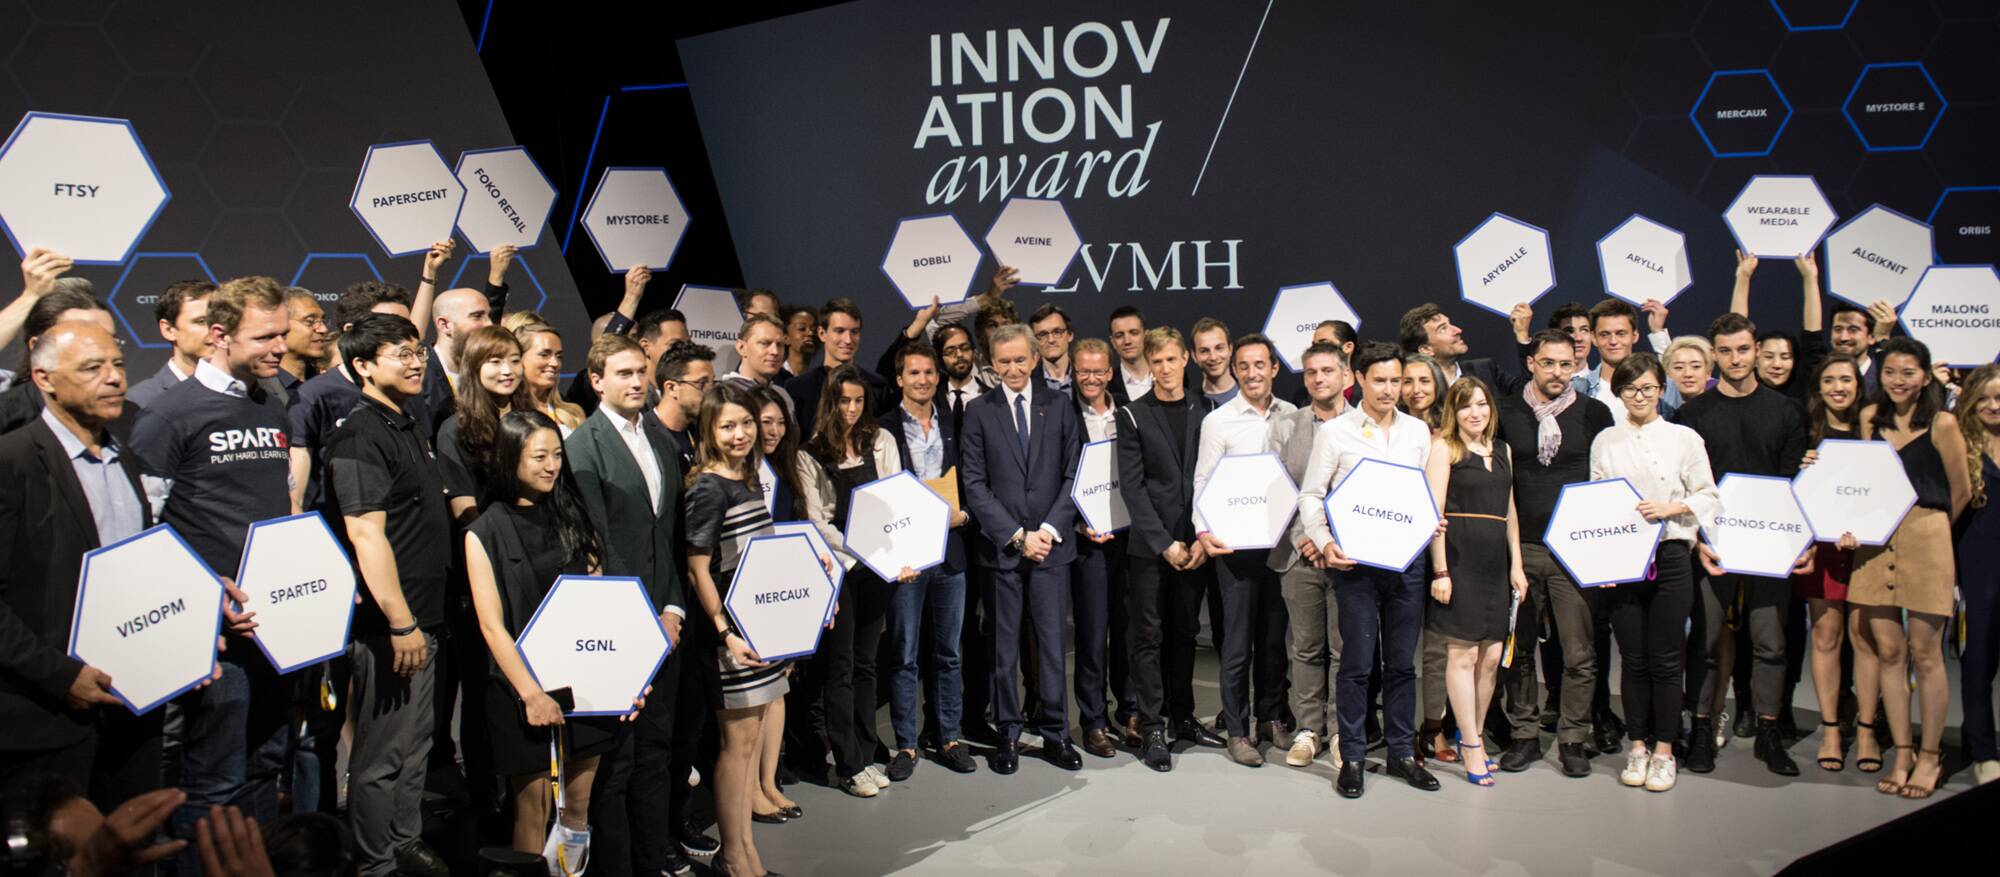 LVMH on X: D-Day! 1 of this 32 startups will receive the 1st LVMH  Innovation Award from Bernard Arnault, on @VivaTech main stage. #VivaTech  #LVLMHtech  / X